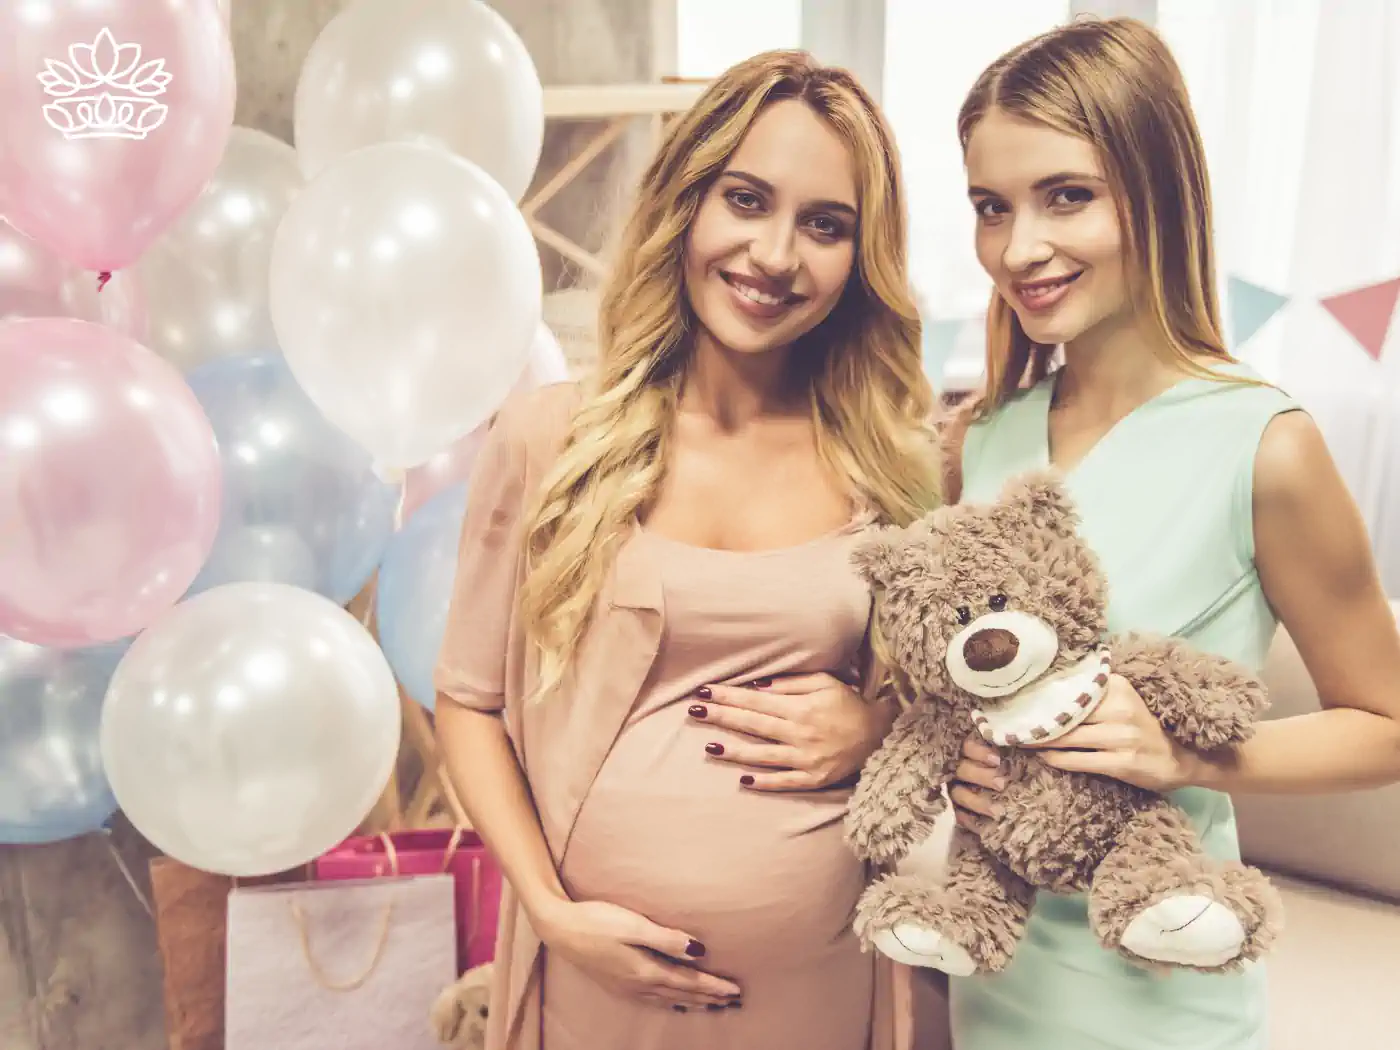 Pregnant Woman and Friend at Baby Shower with Balloons and Teddy Bear - Baby Shower Gift Boxes Collection with Style, Unique Gift Ideas, Prepared for Girl or Boy - Fabulous Flowers and Gifts.